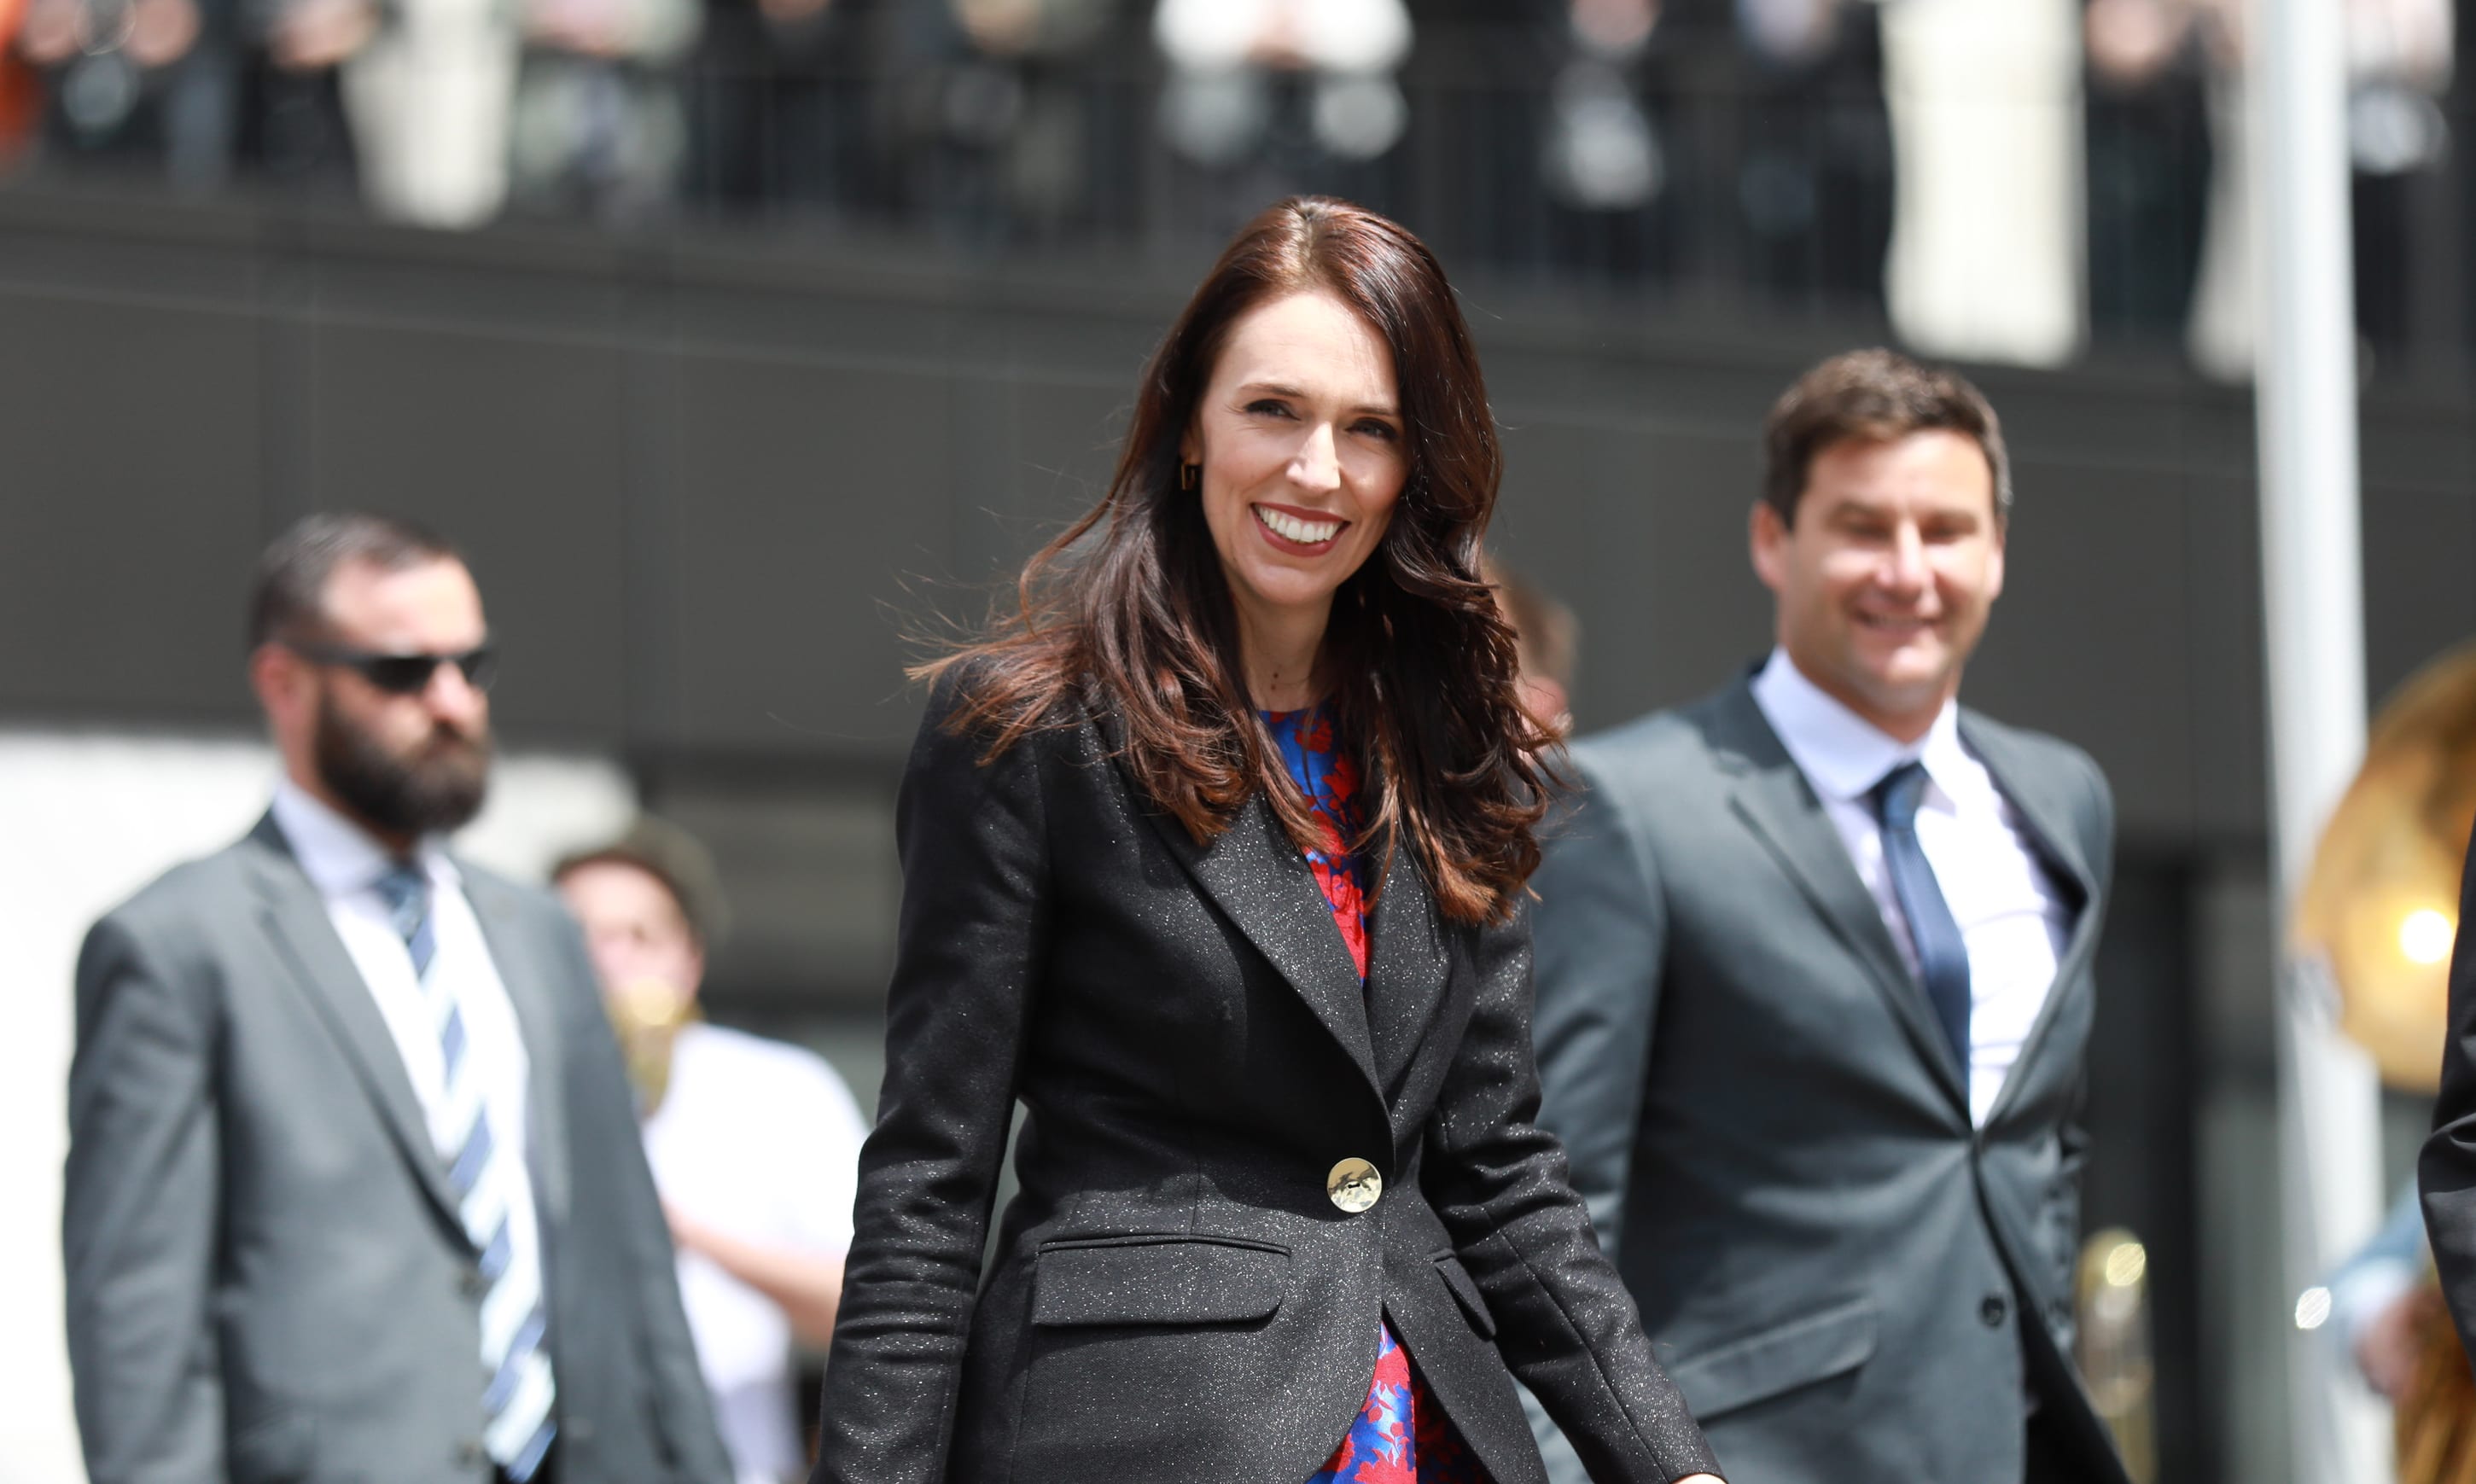 Jacinda Ardern became the 40th Prime Minister of New Zealand.